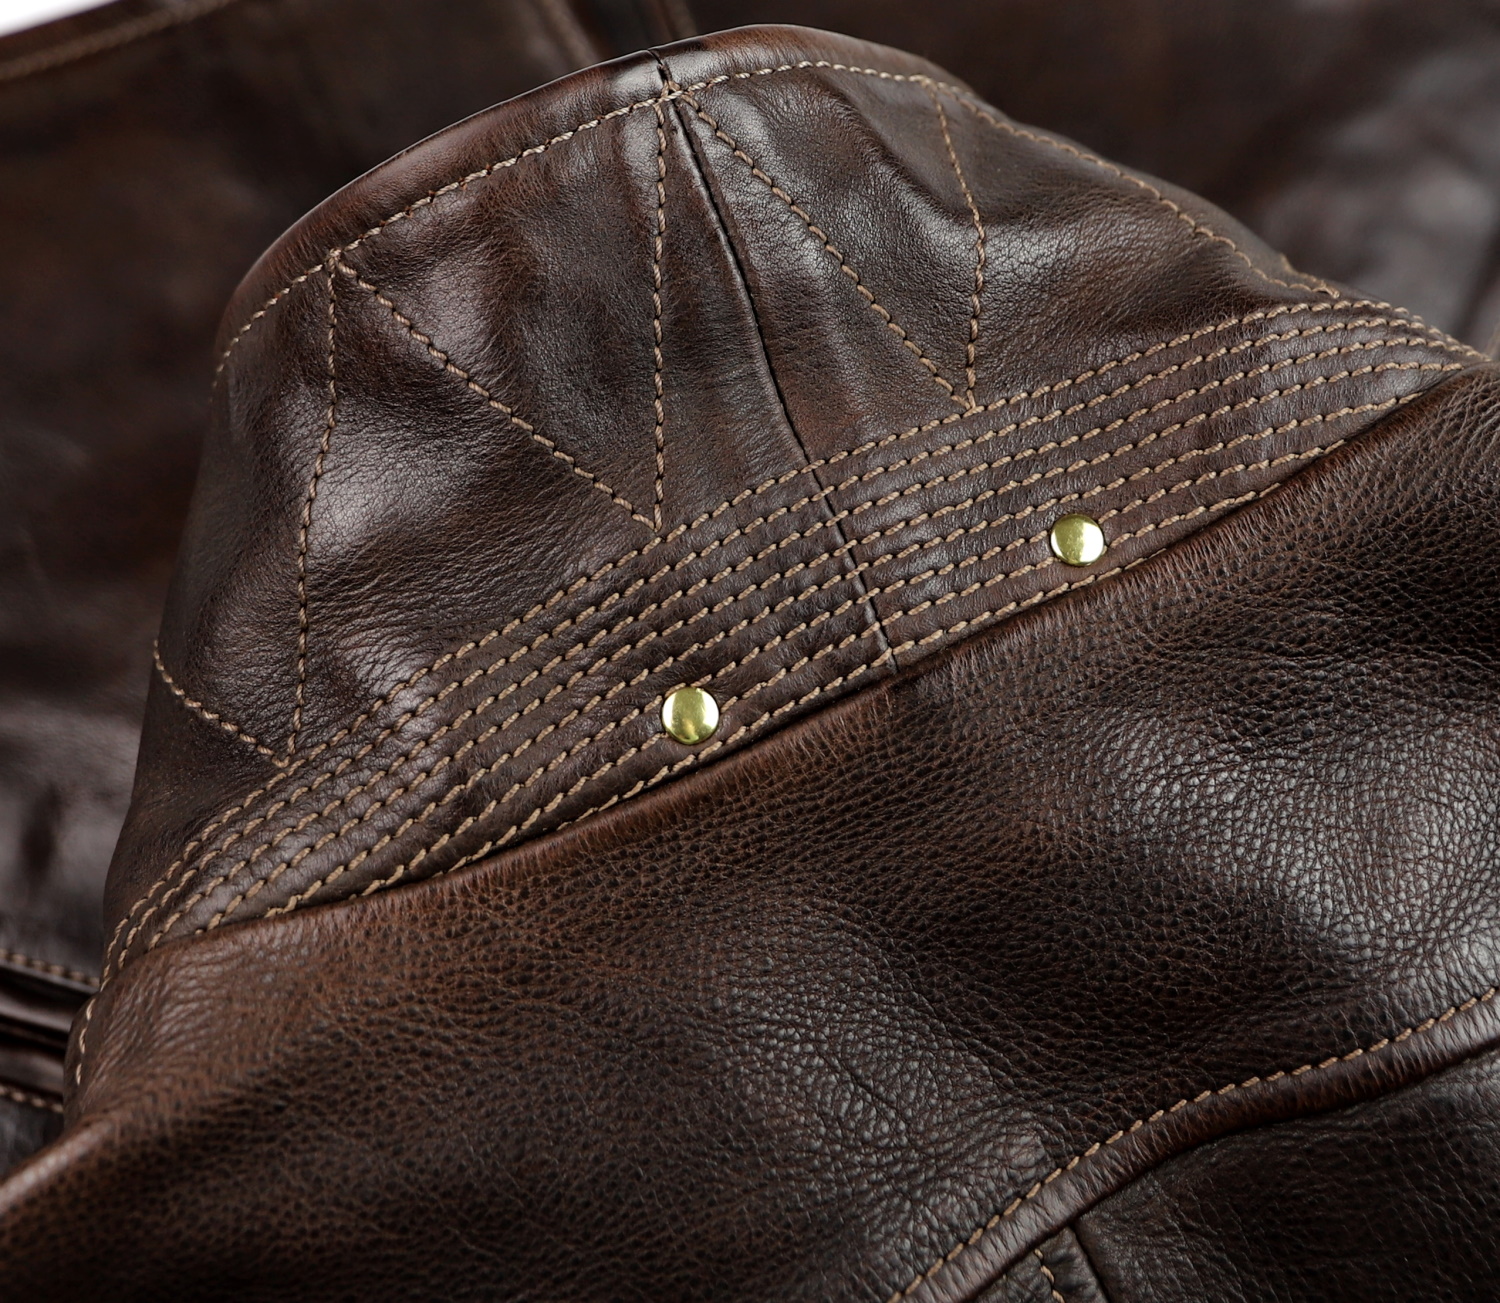 Thedi Hektor Brown Canneto Cowhide L1 collar stitching.jpg